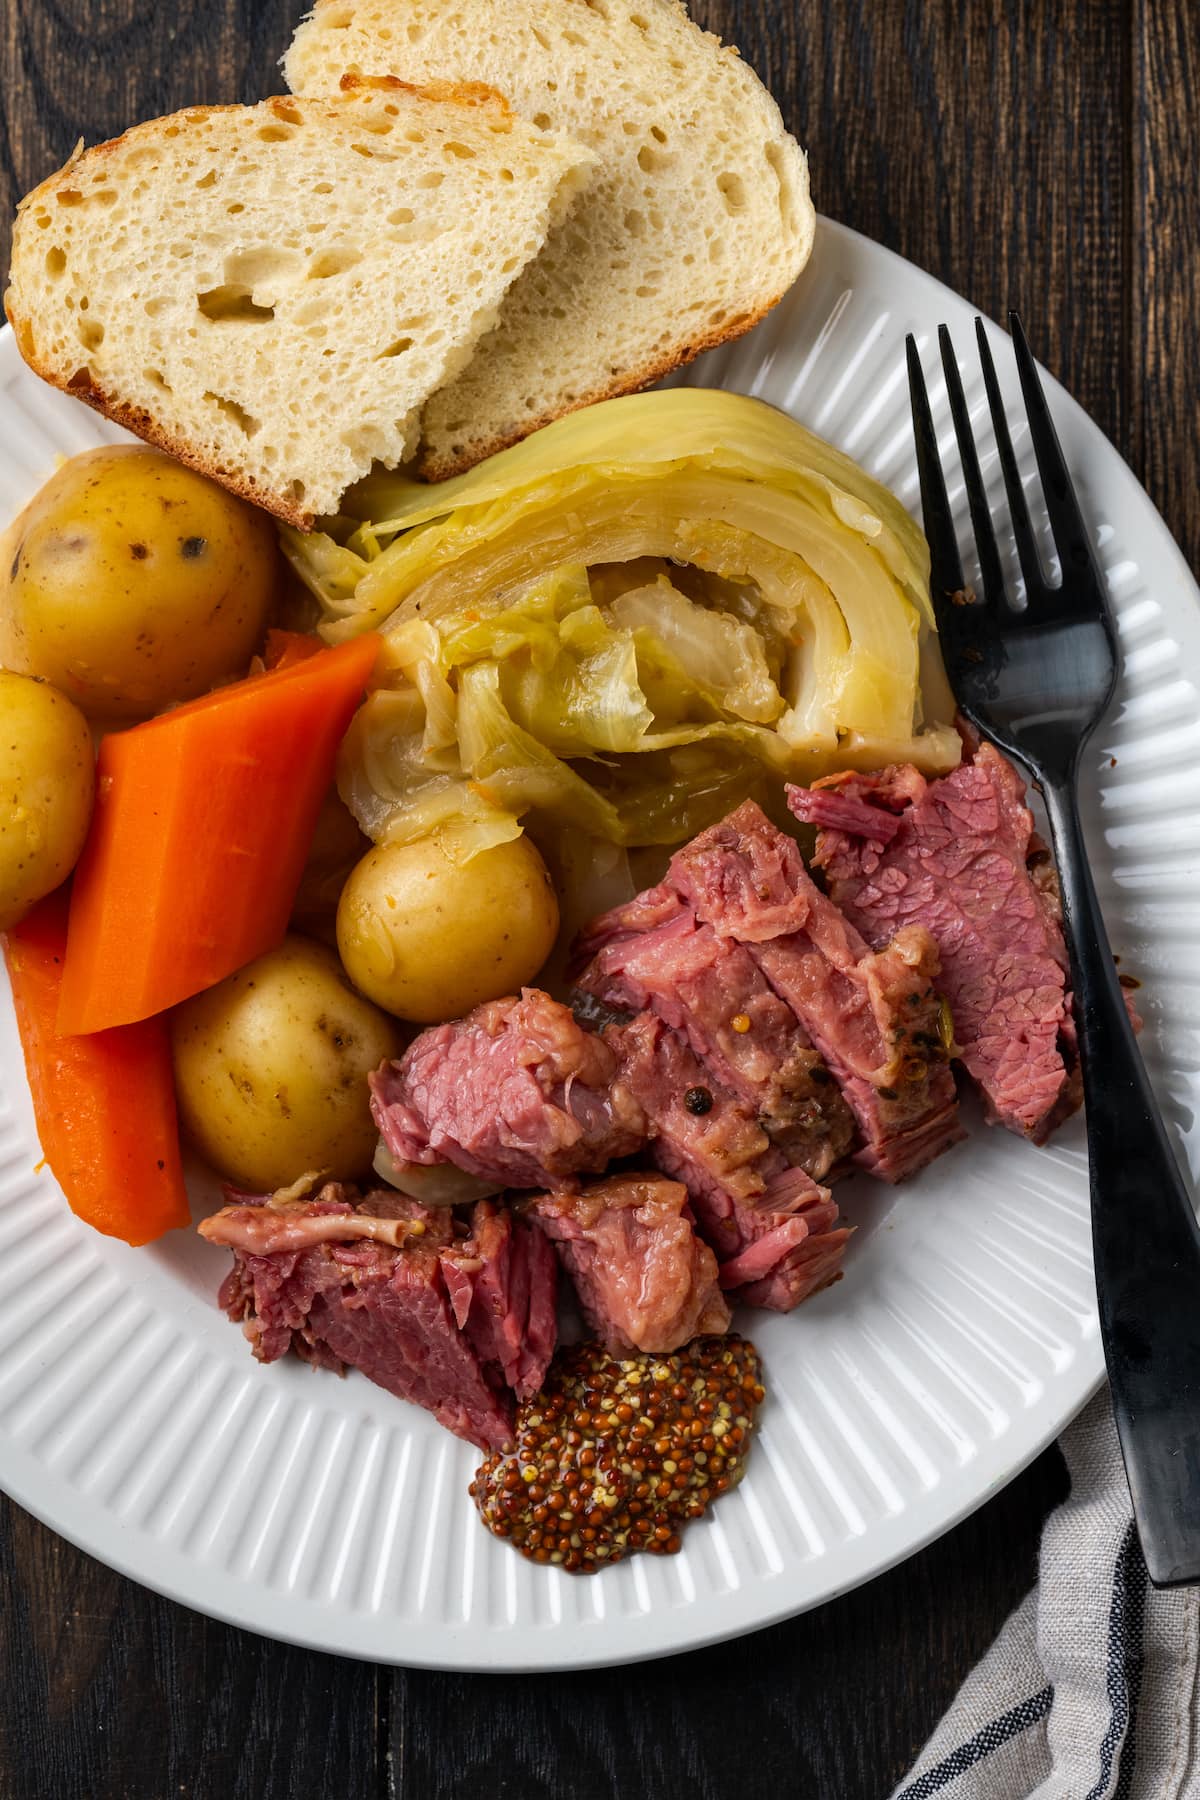 Overhead view of sliced corned beef on a plate with cabbage, potatoes, carrots, and bread slices, next to a fork.